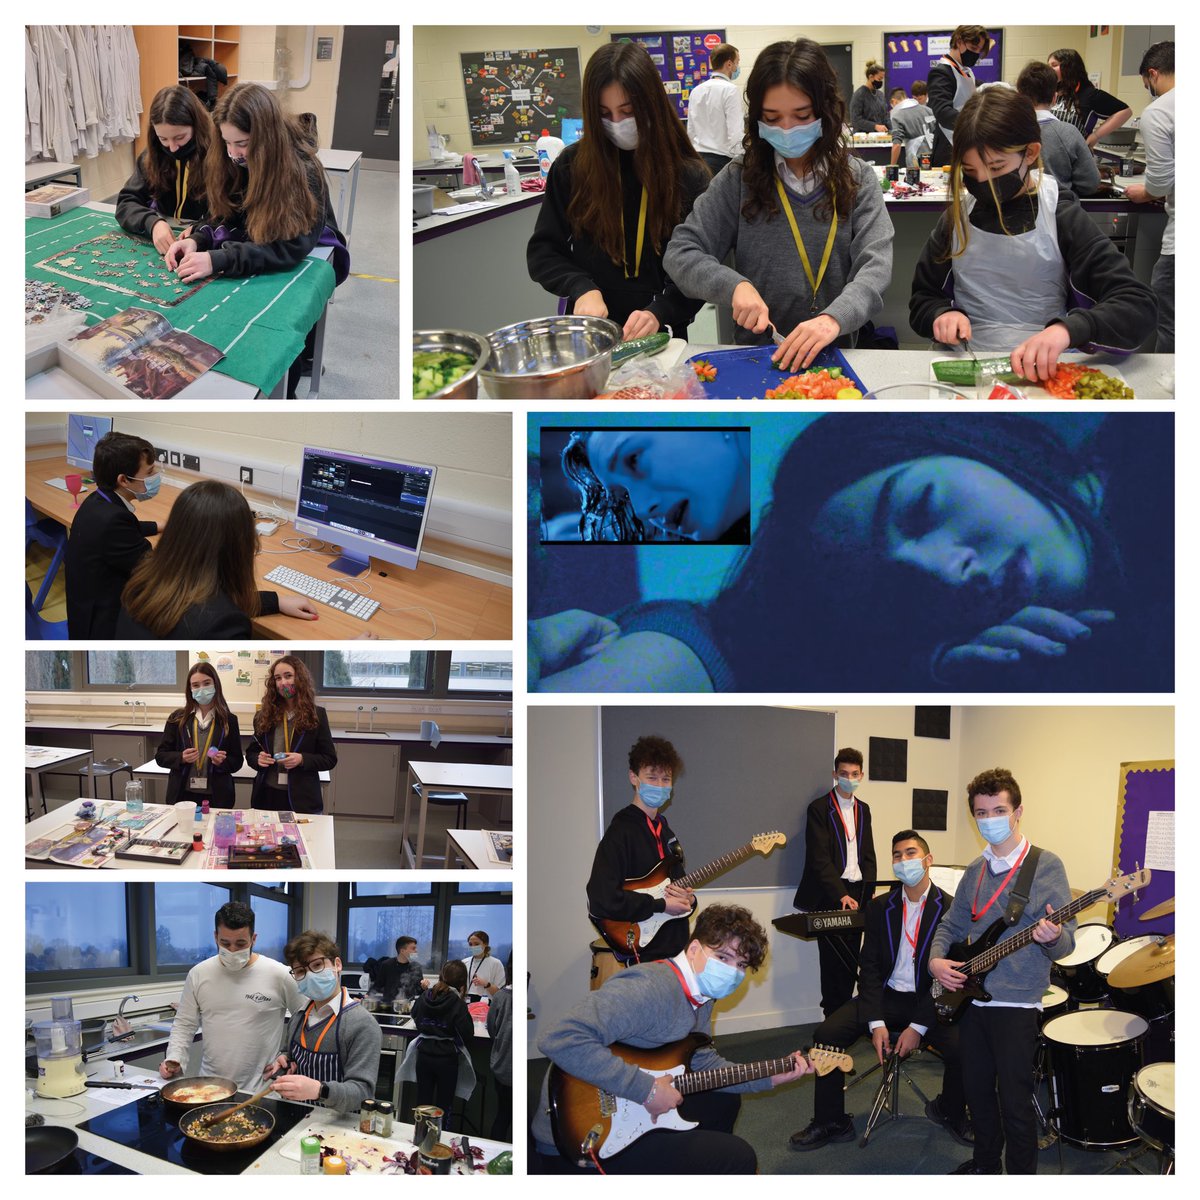 JCoSS students enjoyed a choice of over 50 activities on Enrichment Drop Down Day today. Sessions ranged from cooking culinary delights in the ‘Israeli Café’ to ‘Battle of the Bands’ and a ‘4 Hour Film School’ where they could recreate famous scenes from popular movies! #JCoSS